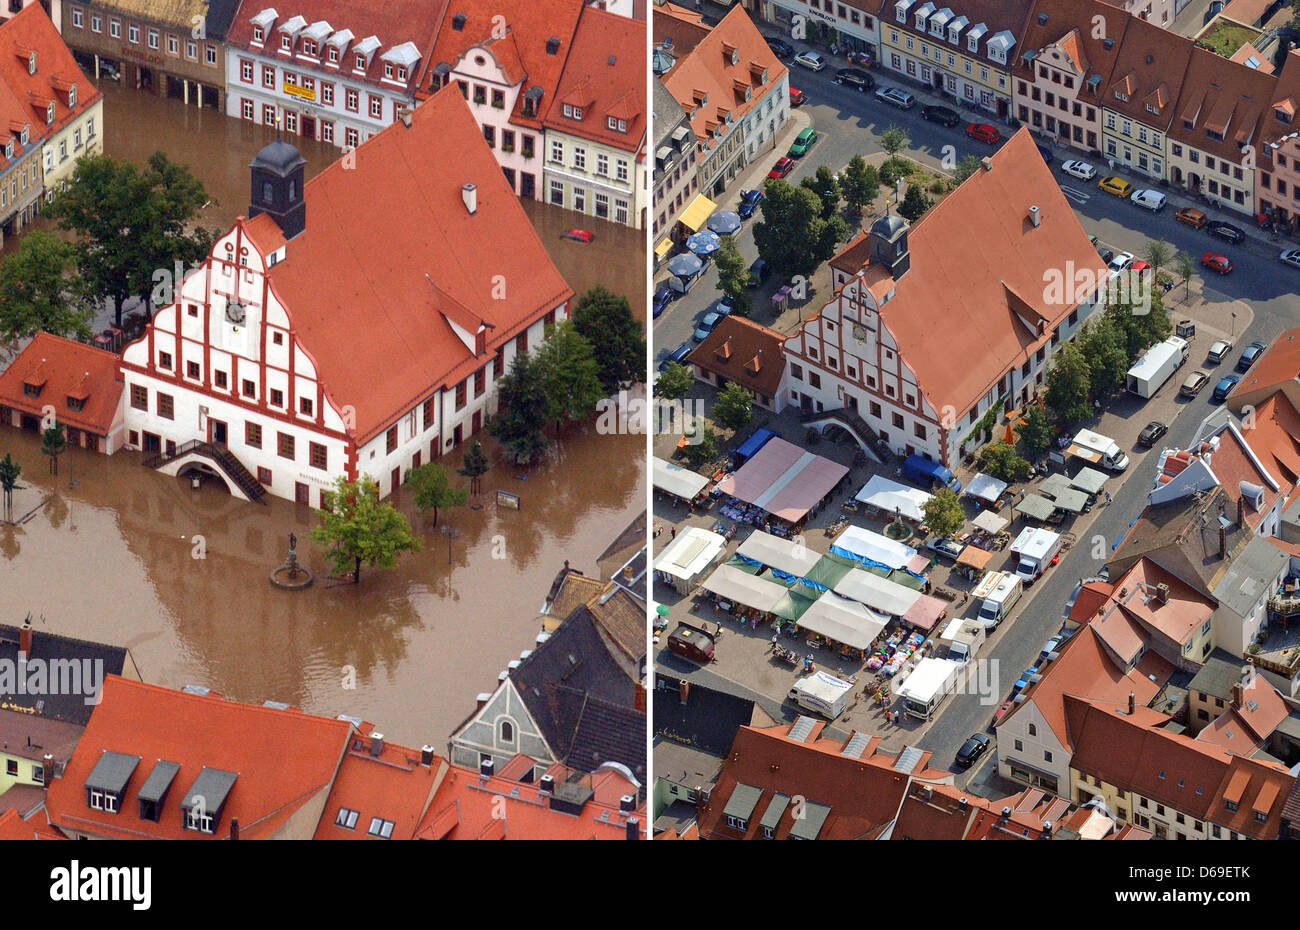 COMBINATION PICTURE - A combination picture shows the city of Grimma which has been flooded by the river Mulde on 14 August 2002 (L) and an aerial view of the city hall in Grimma, Germany, 26 July 2012. Grimma was one of the cities most affected by the flood desaster in 2002. Ten years after the flood Grimma is a flourishing town again. Photo: Jan-Peter Kasper Stock Photo